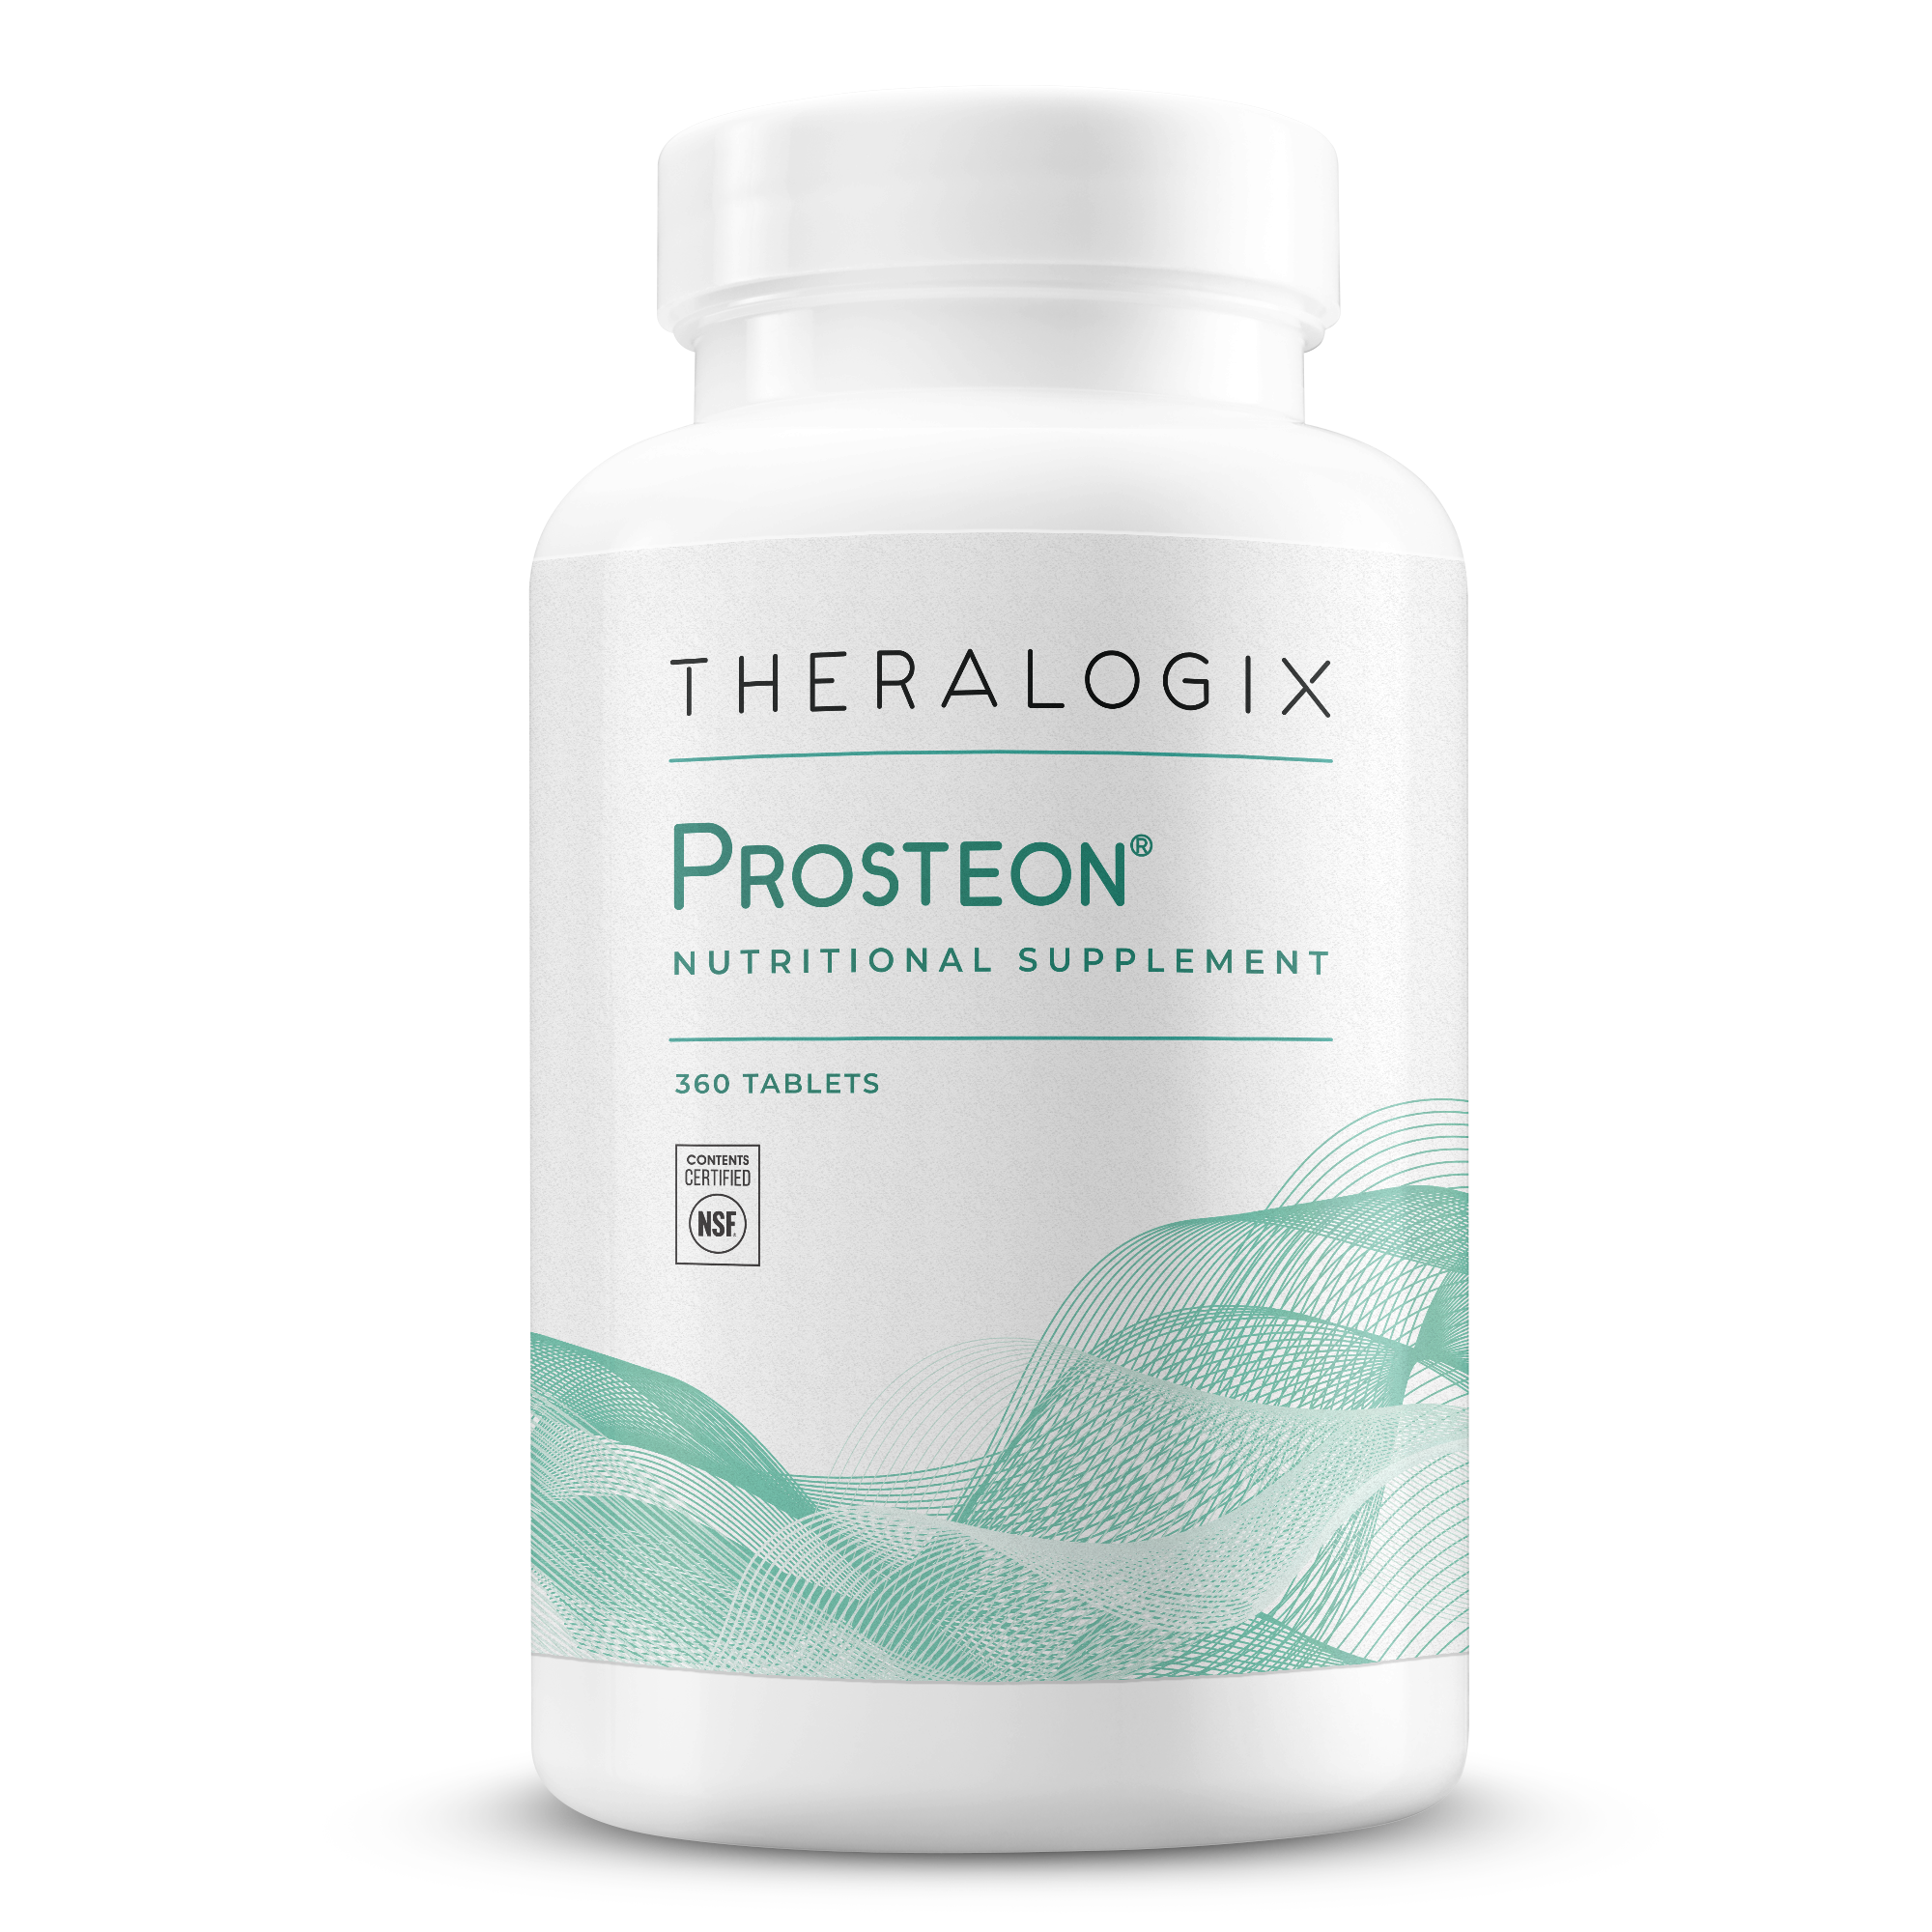 Prosteon® Nutritional Supplement (Ships from the US, arrives in 11-14 days)